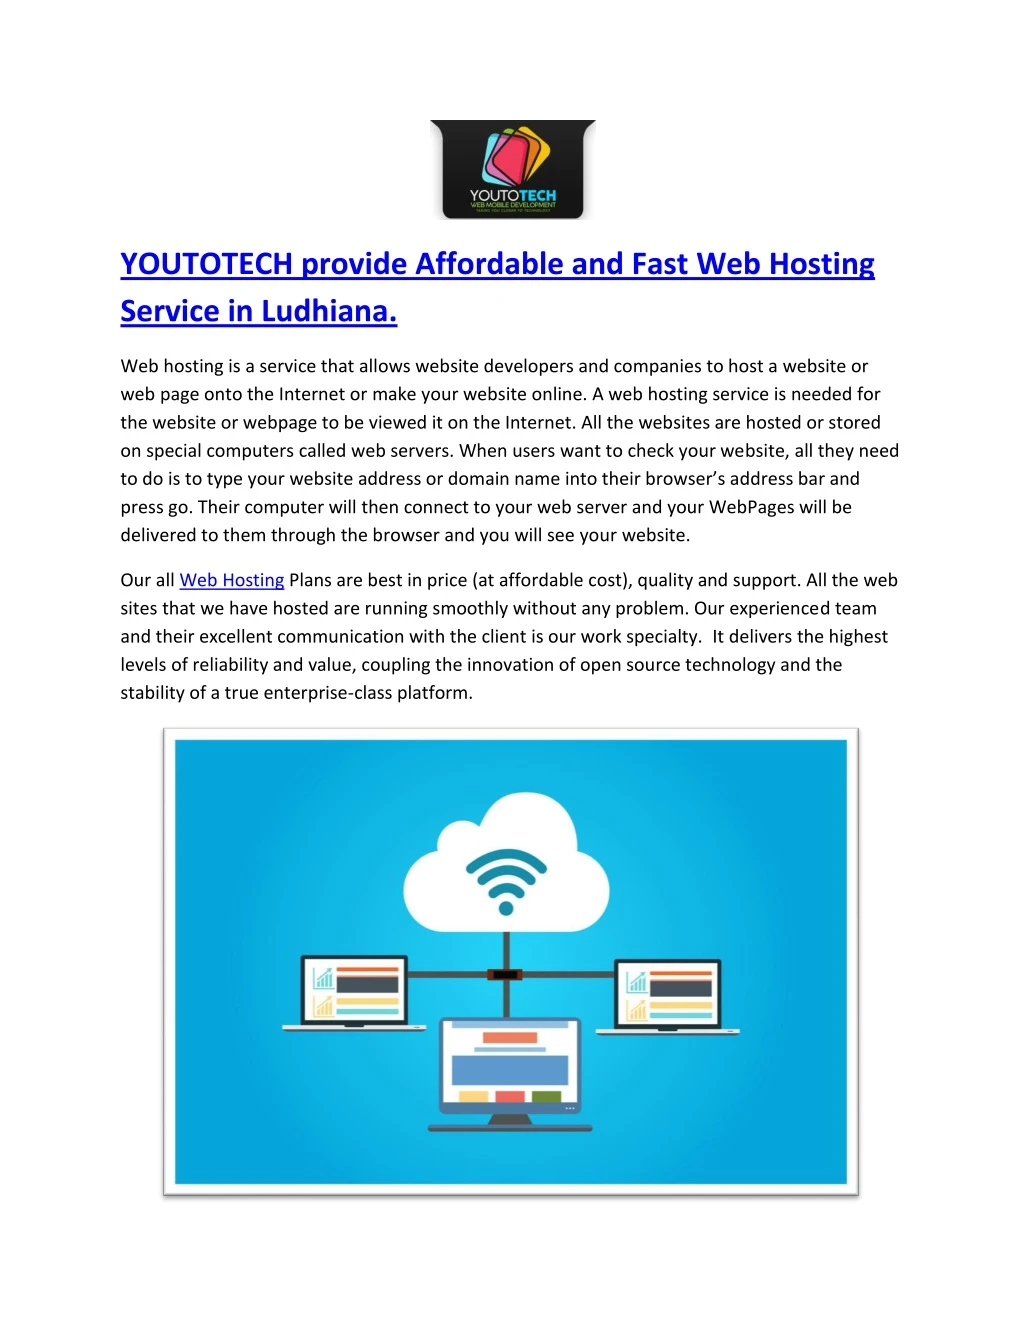 youtotech provide affordable and fast web hosting